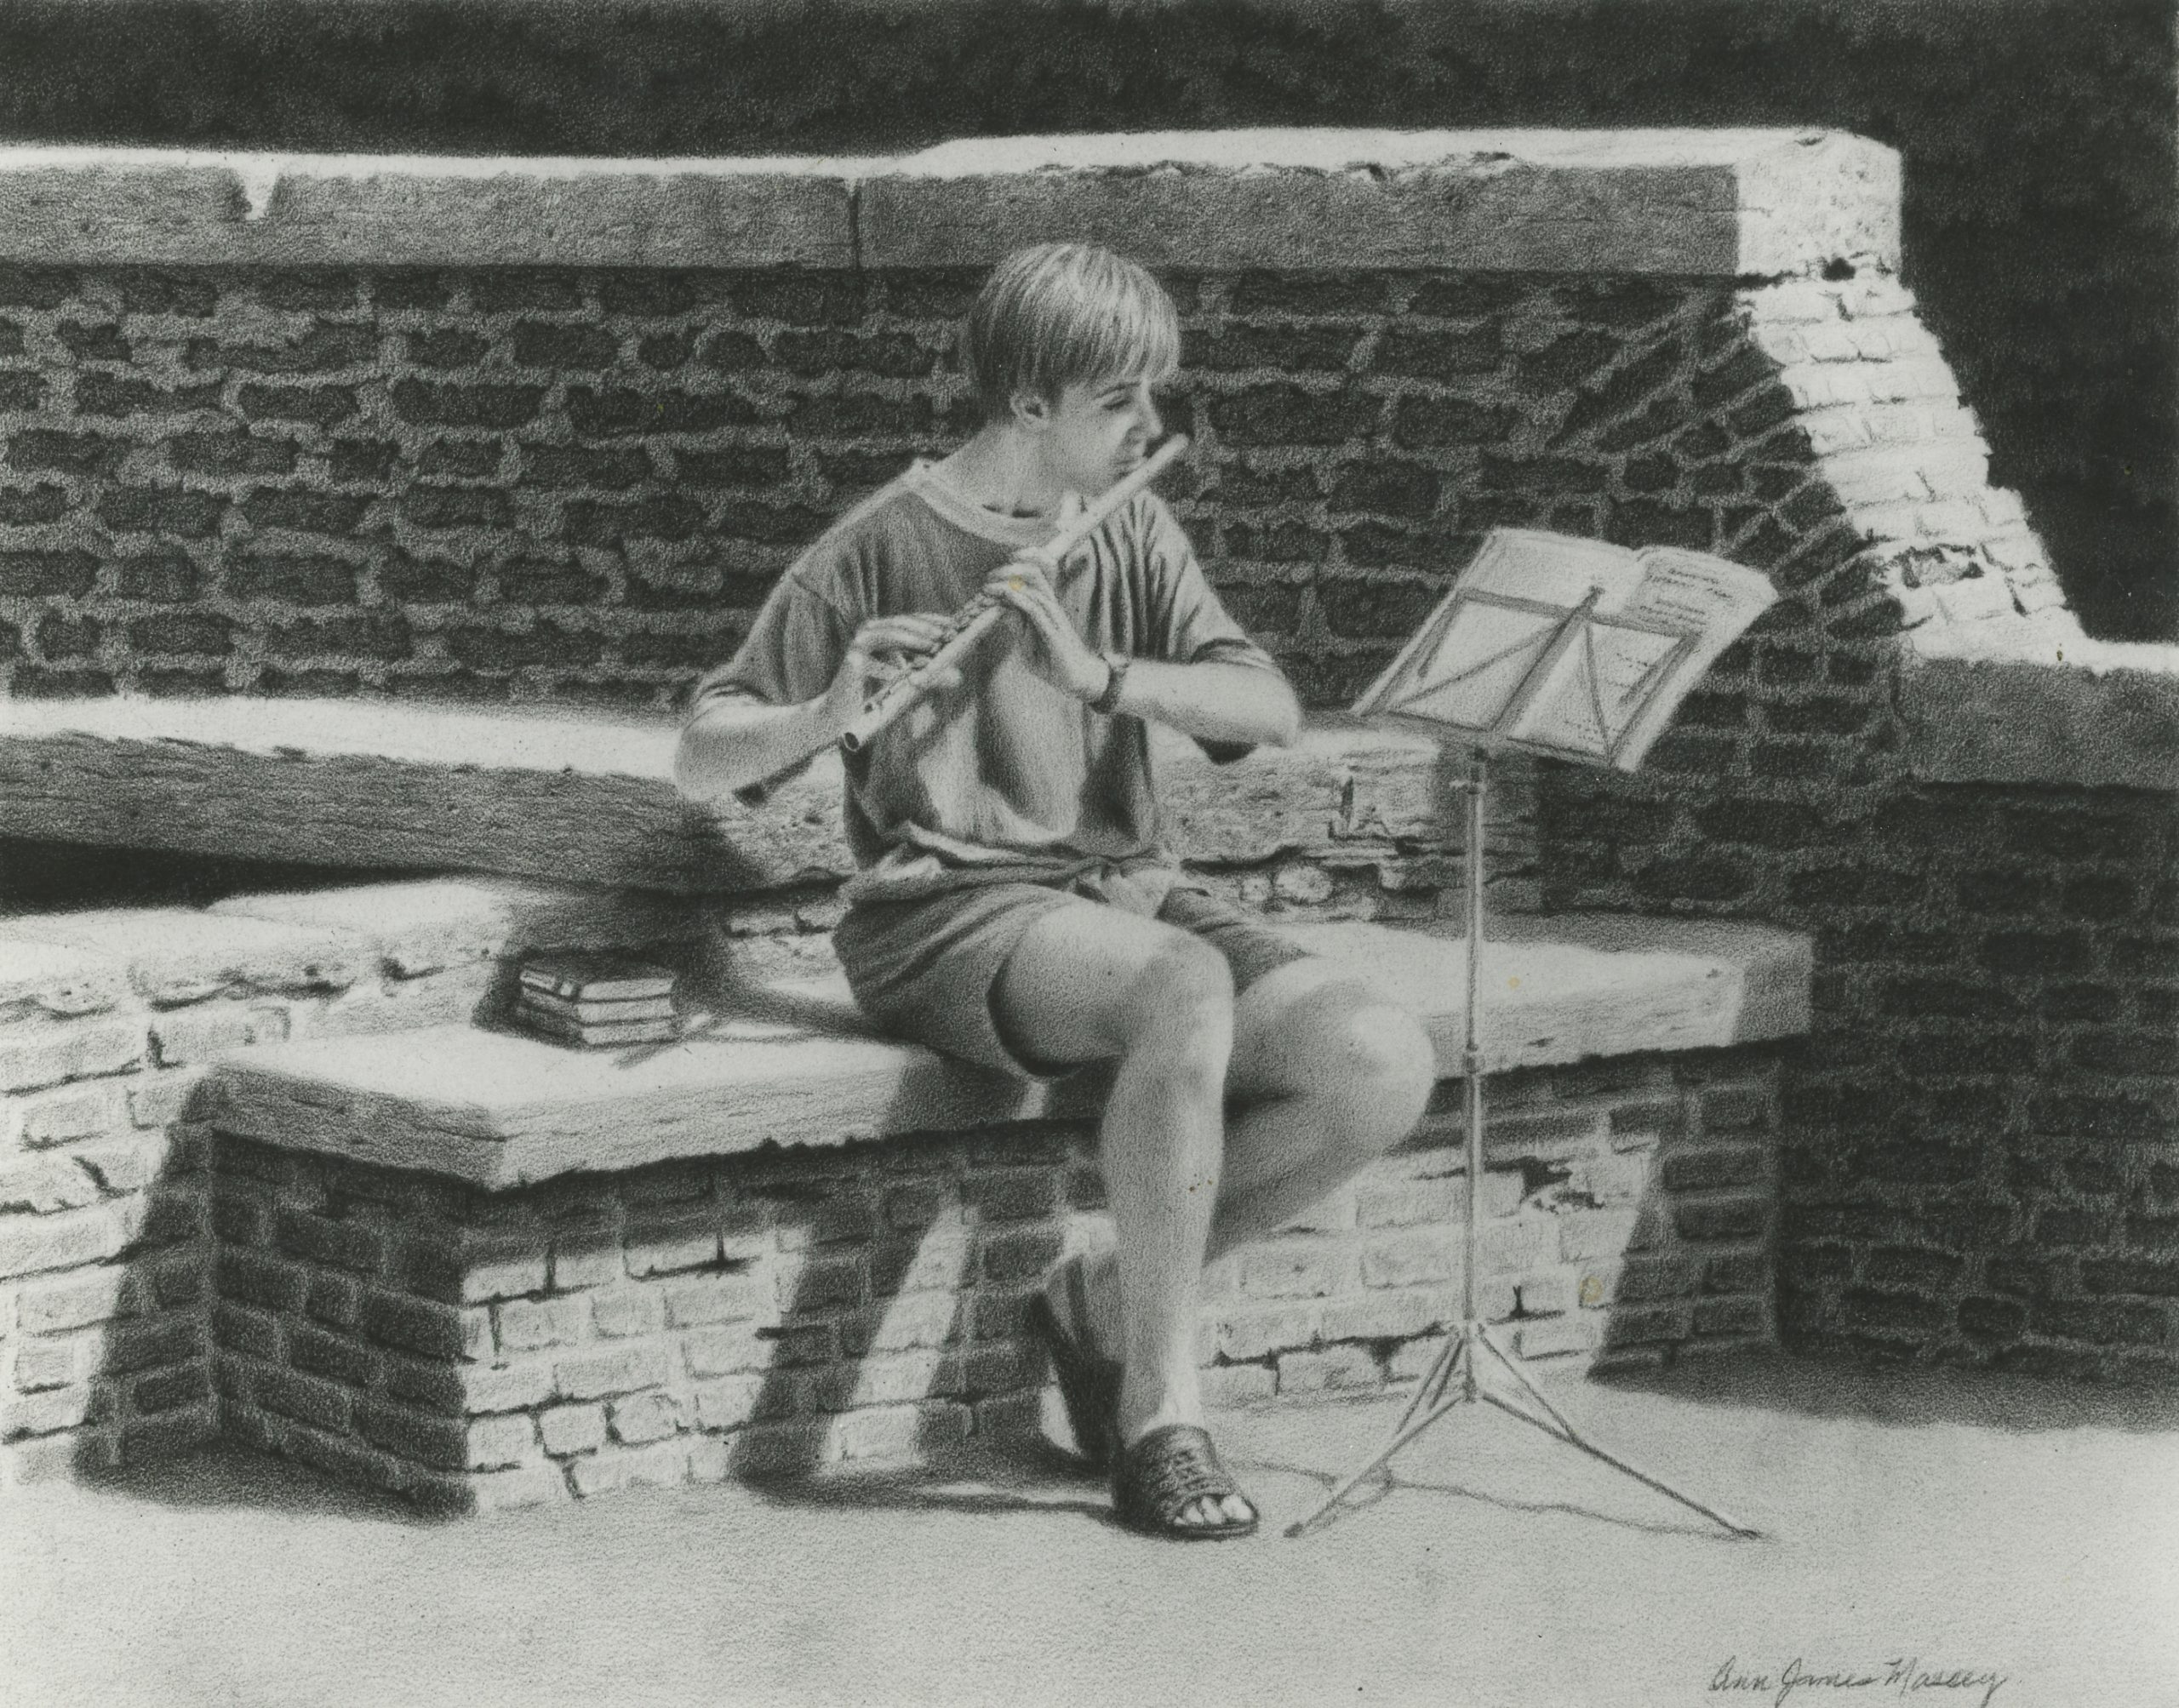 The Flautist © 1995 Ann James Massey
9.5in x 12in | 24.1cm x 30.5cm
Black Prismacolor wax pencil on paper
Collection of Martha G de Chavez